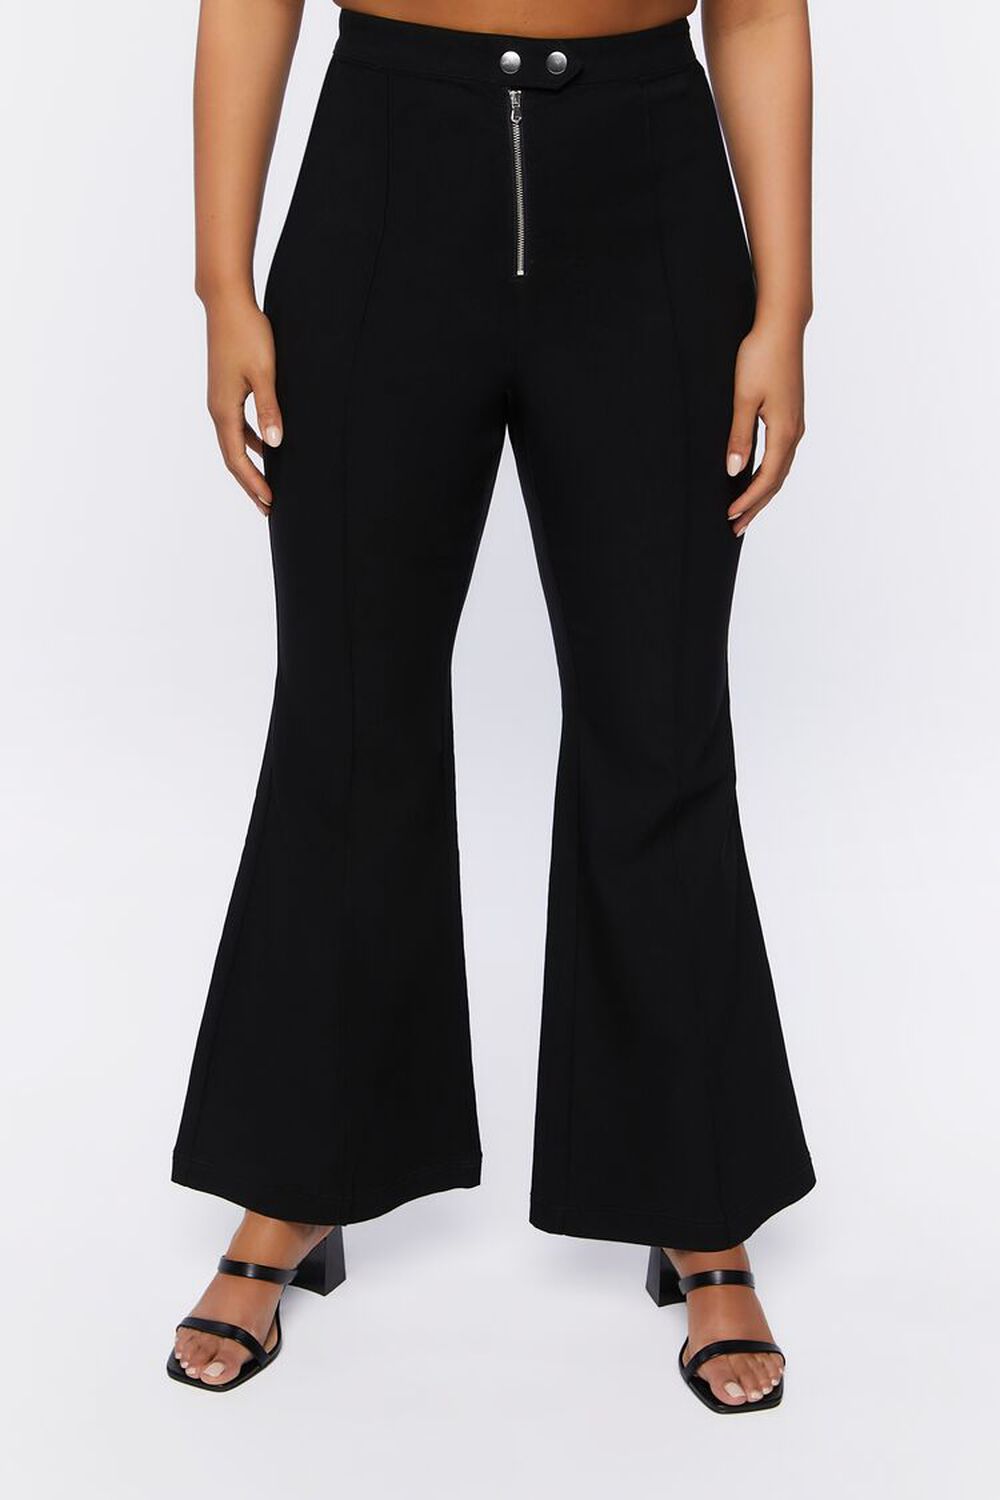 Plus Size High-Rise Flare Pants, image 2